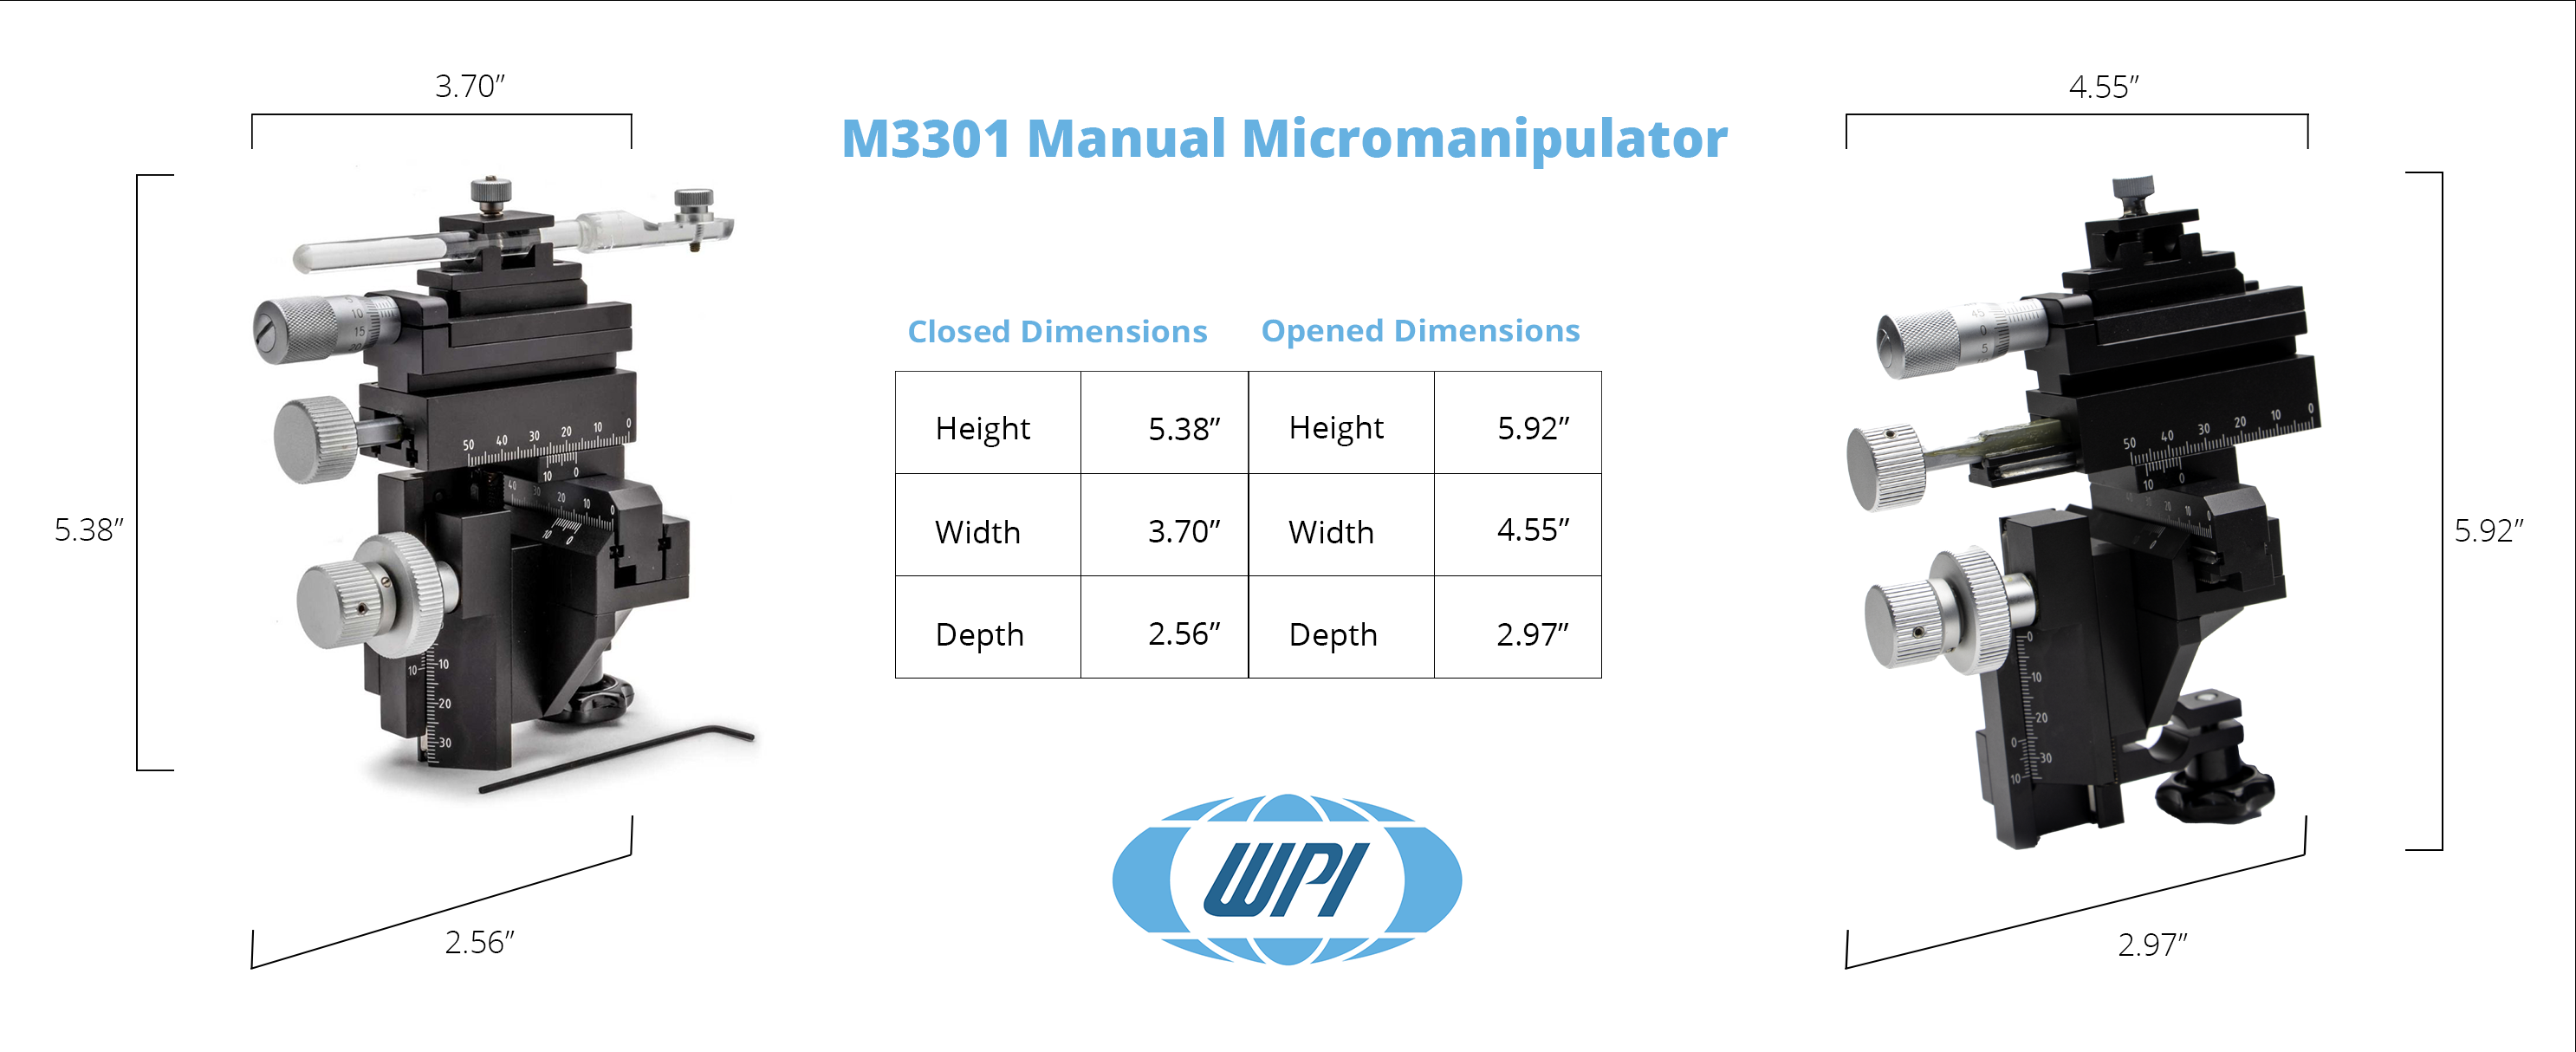 Specifications of the M3301